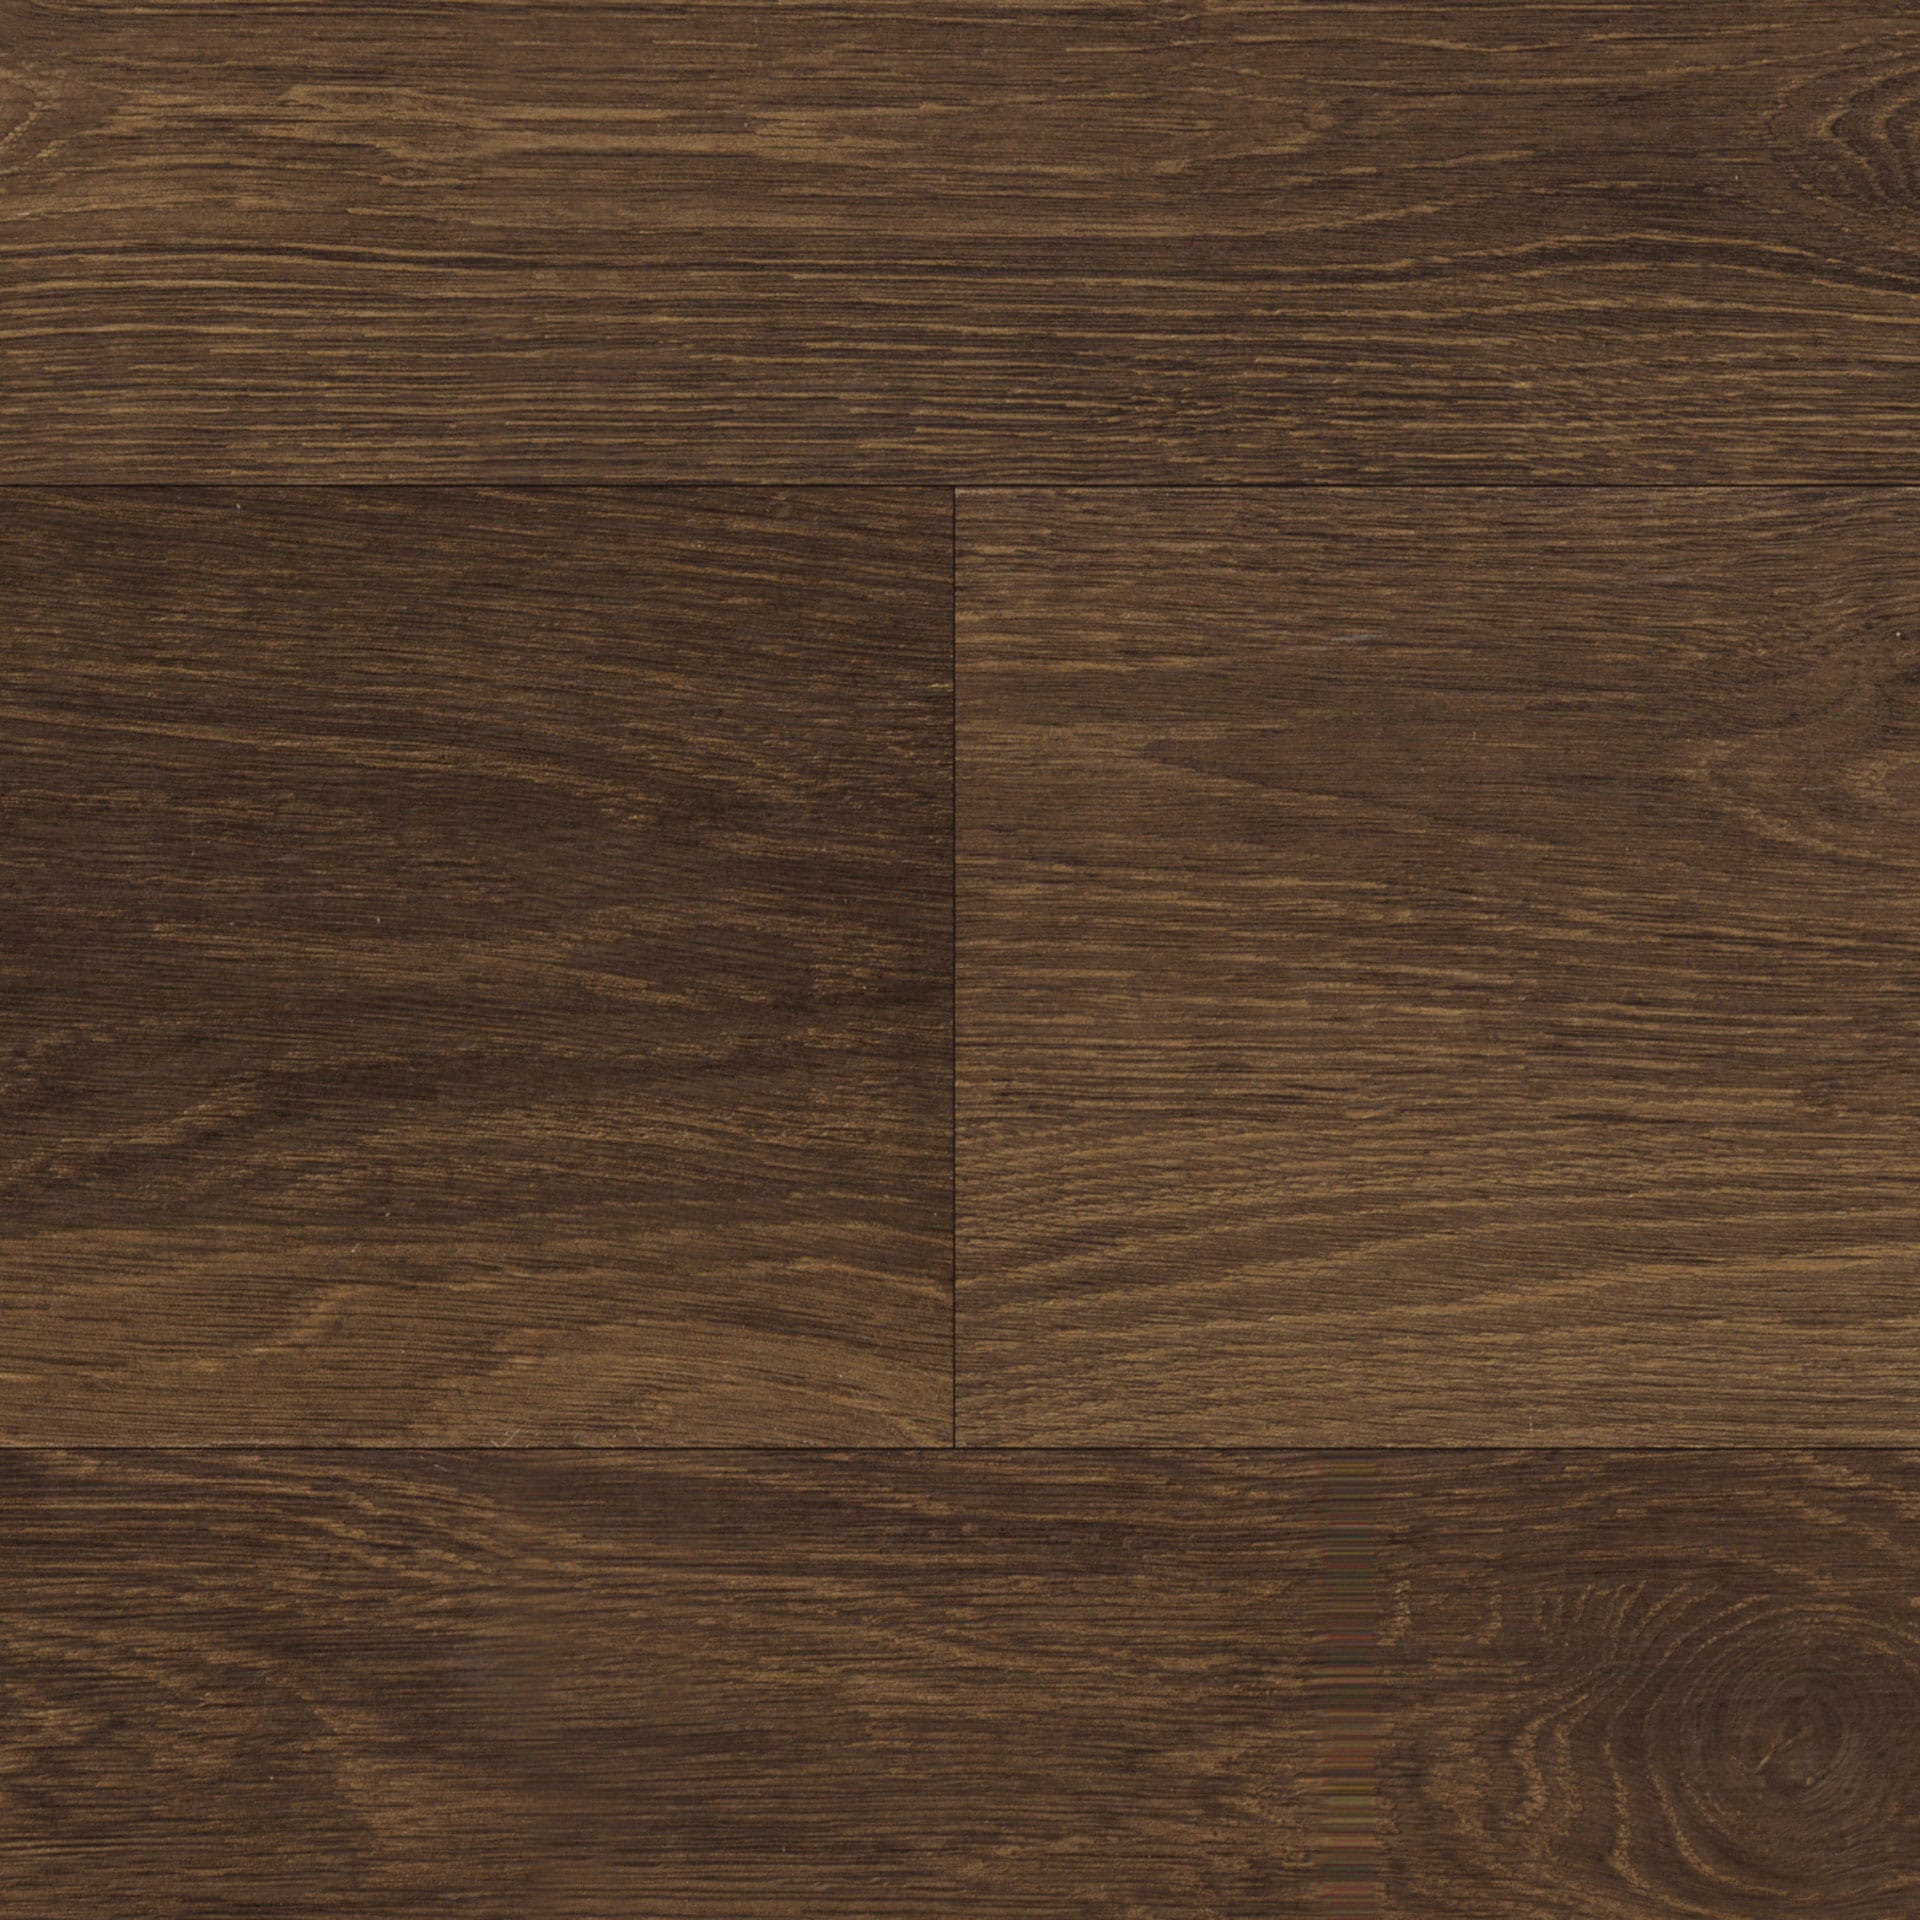 View of VGW98T Smoked Beech luxury vinyl tile by Karndean